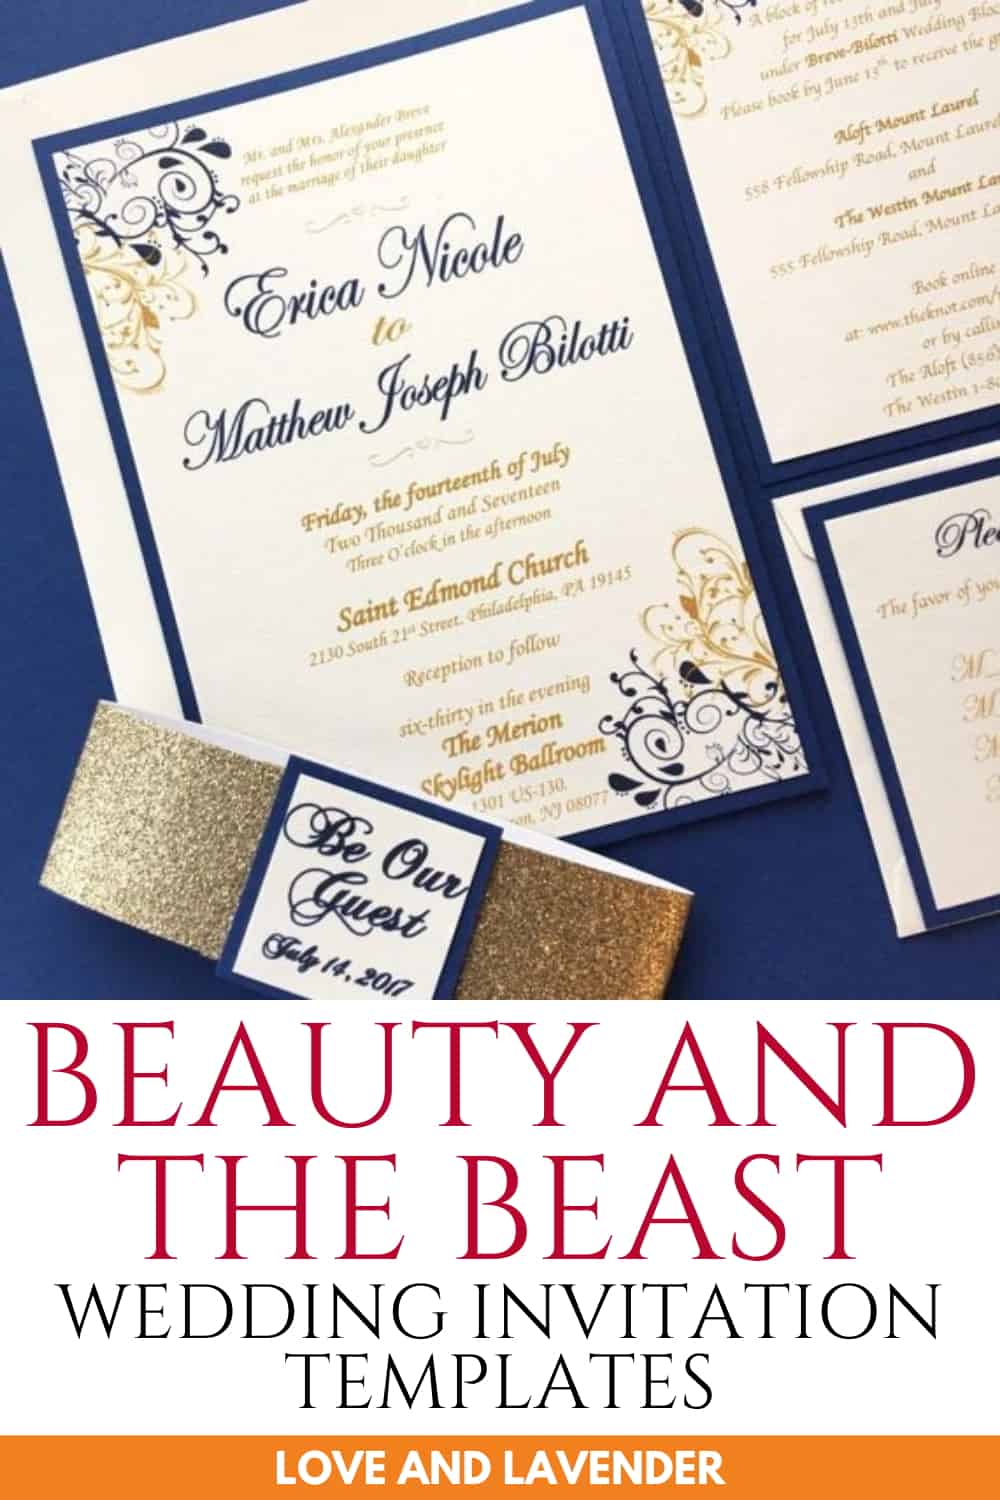 5 Beauty and the Beast Wedding Invitations: Be Our Guest!